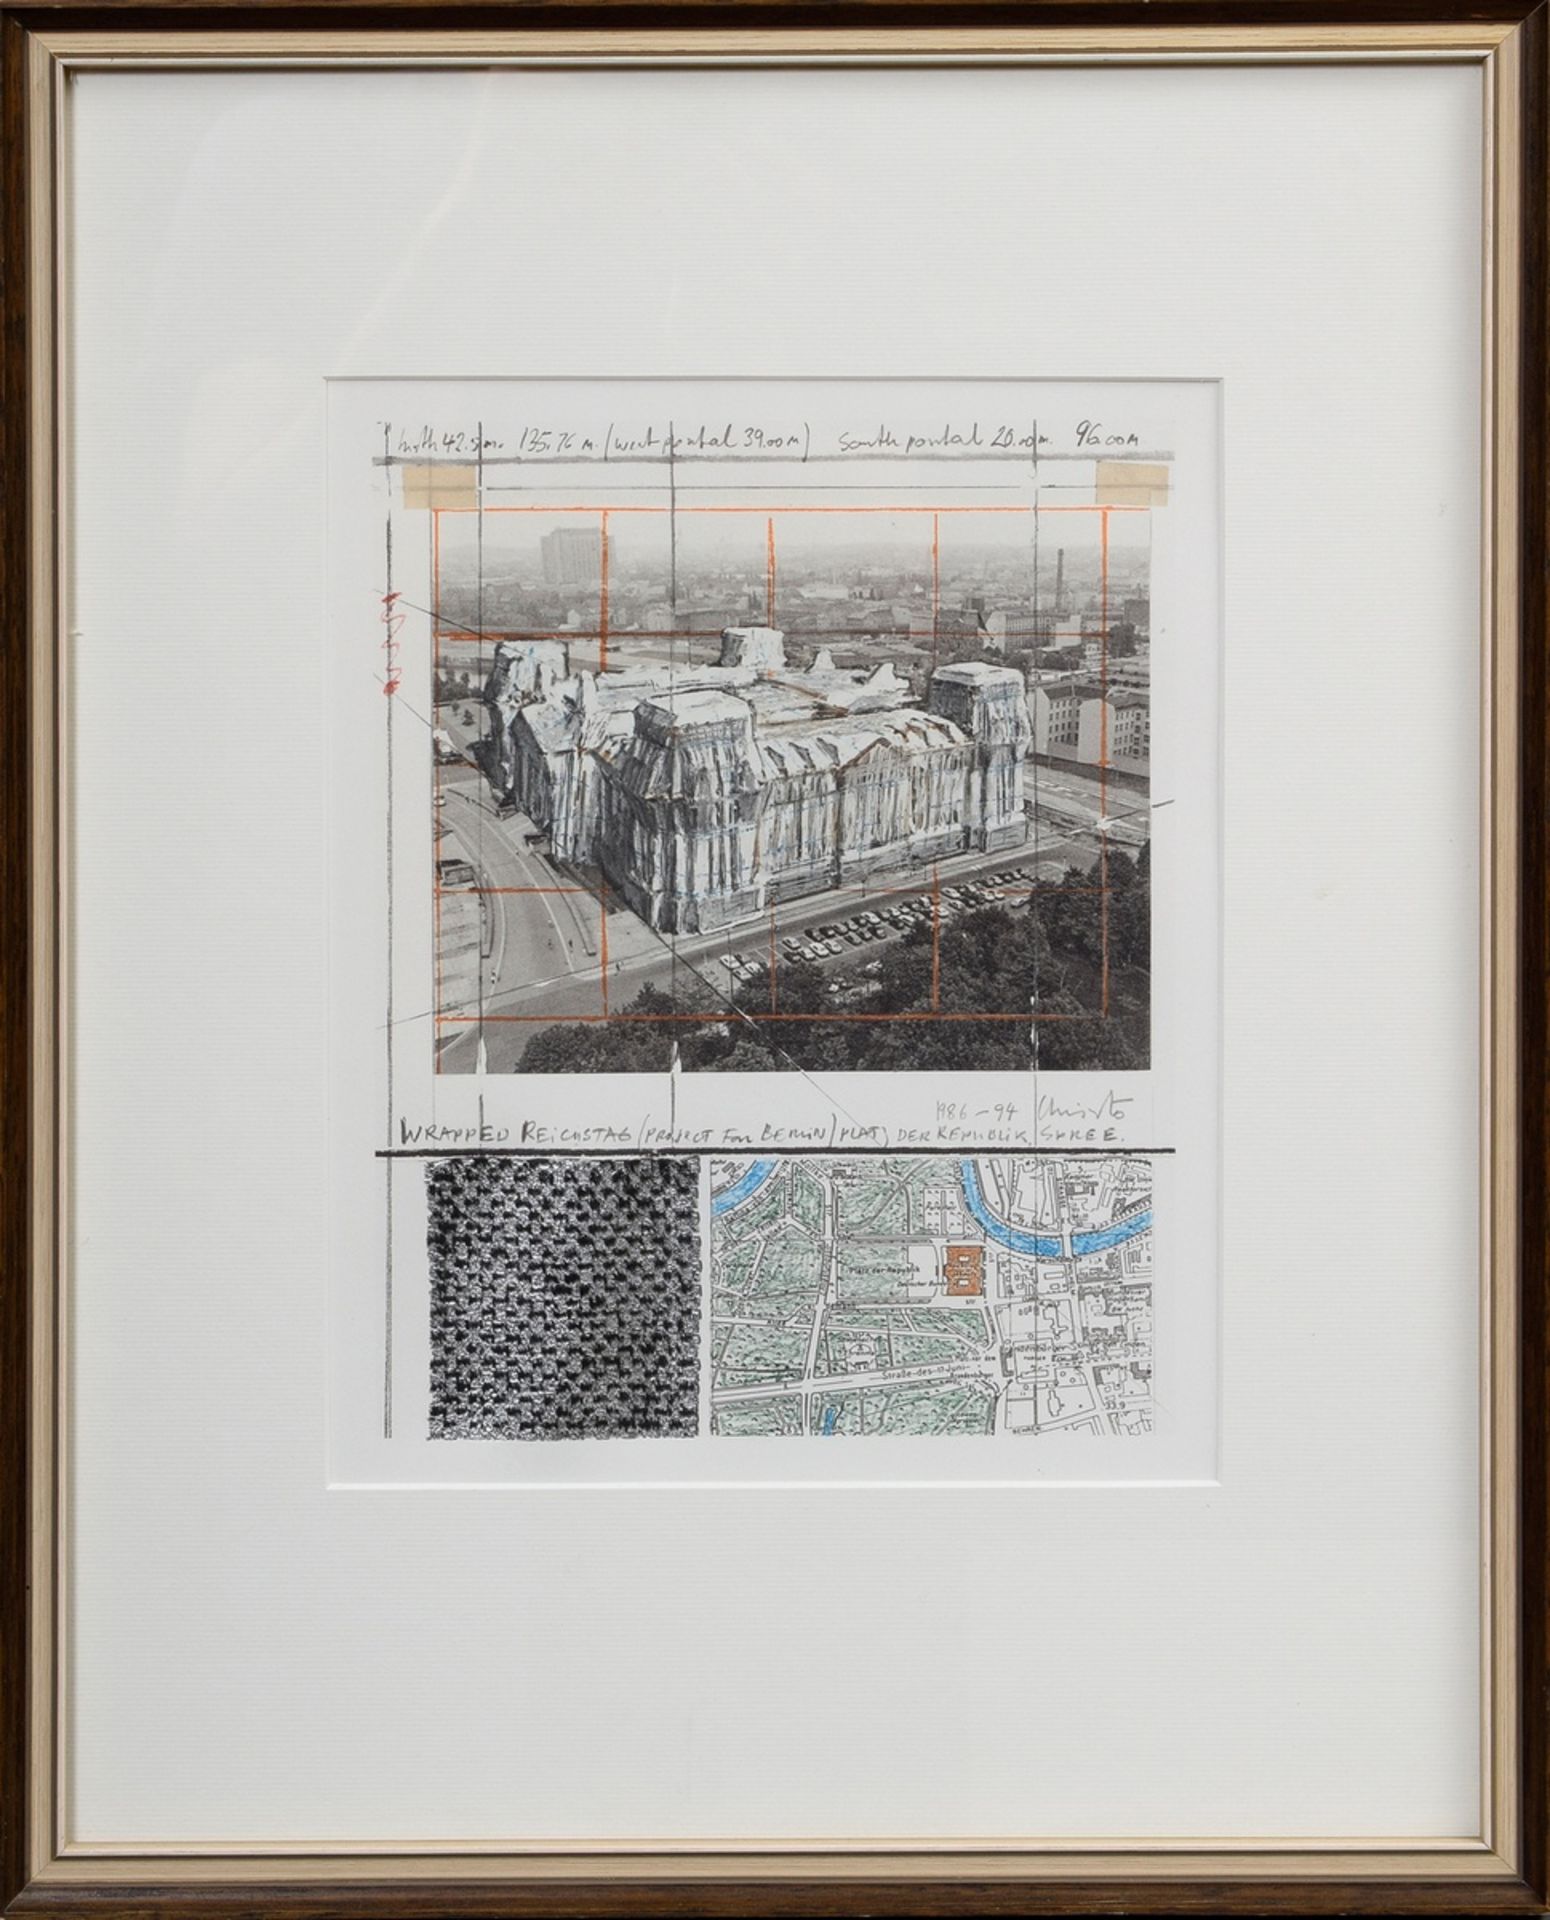 Christo (1935-2020) "Wrapped Reichstag", colour offset lithograph/collage, signed in print, PM 28x2 - Image 2 of 2